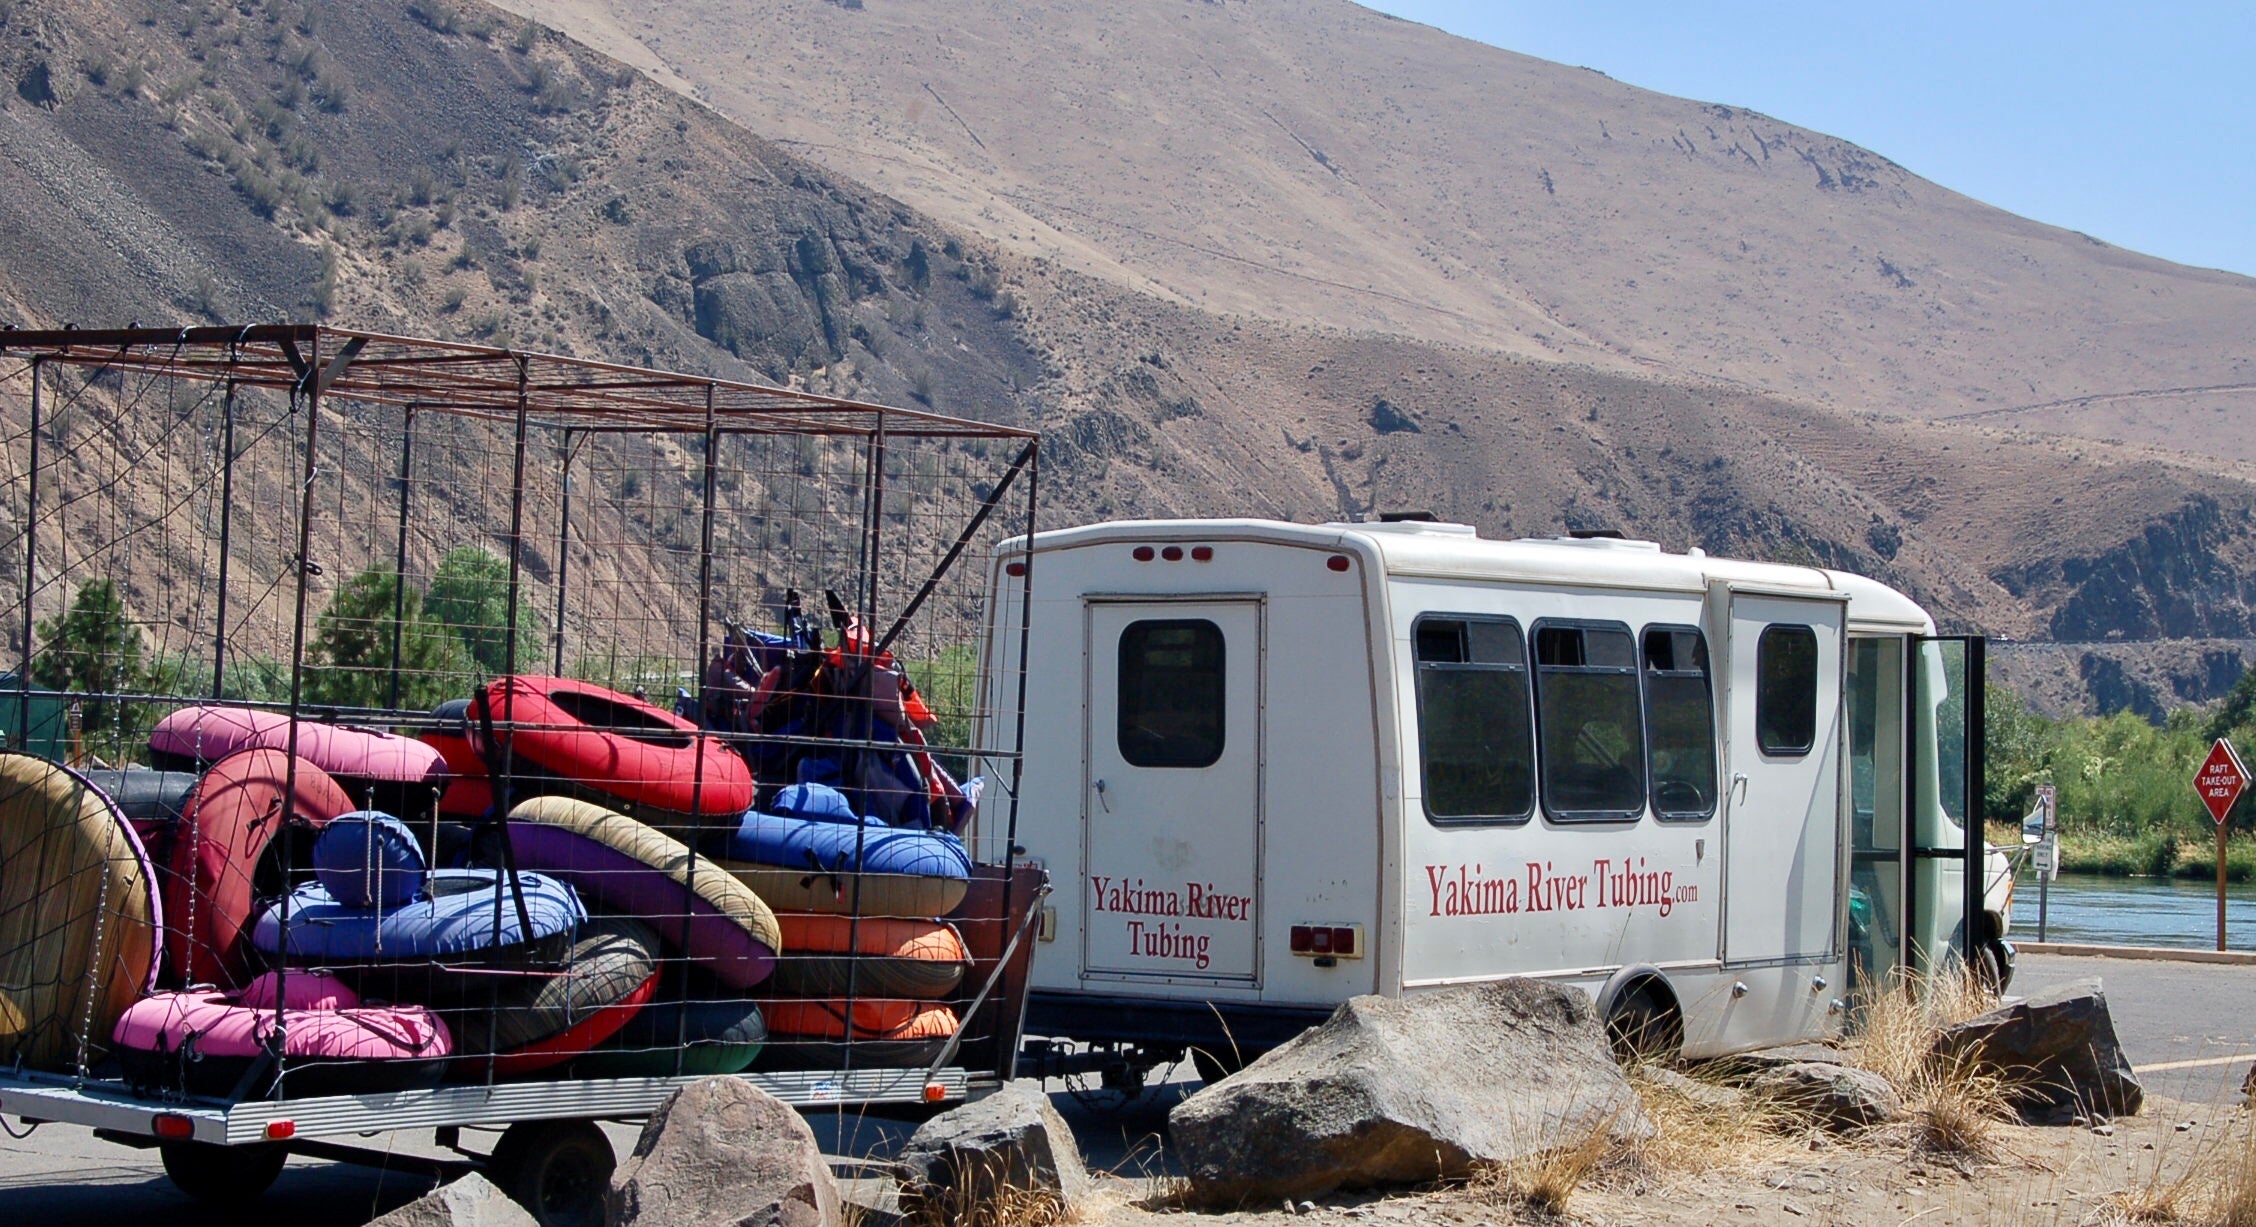 Camper submitted image from Roza - Yakima River Canyon - 1